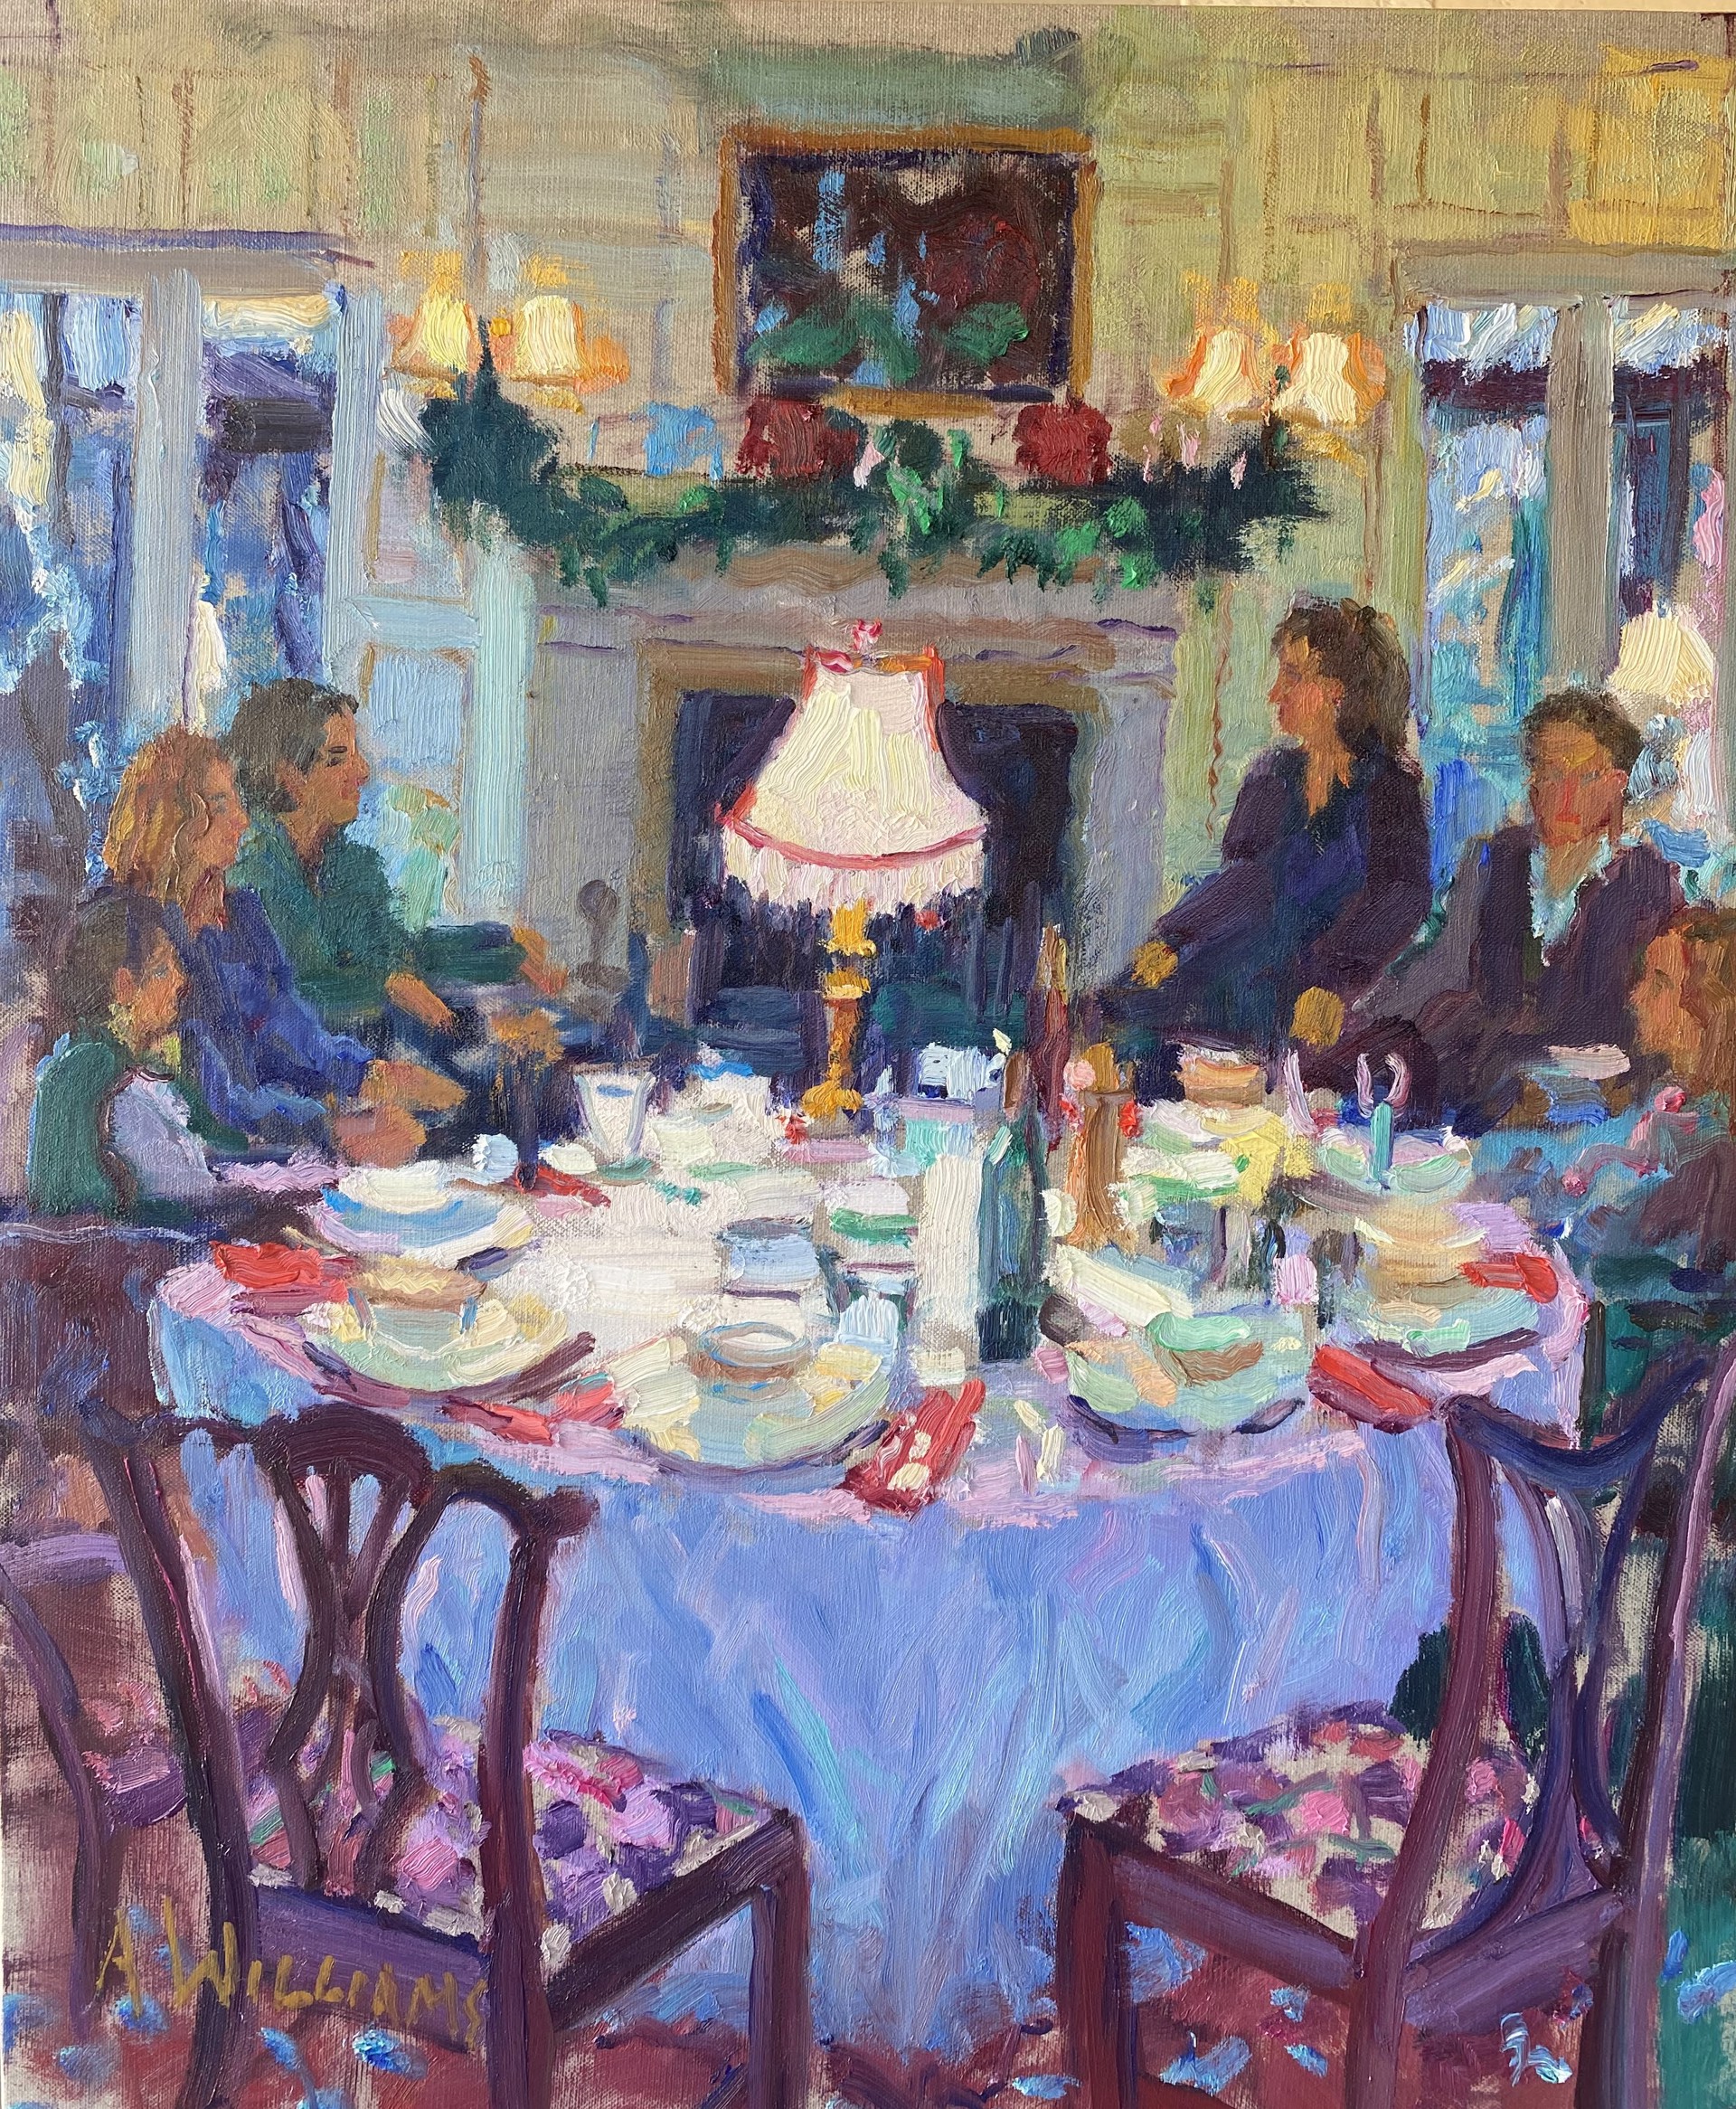 "Dinner with Friends" original oil painting by Alice Williams